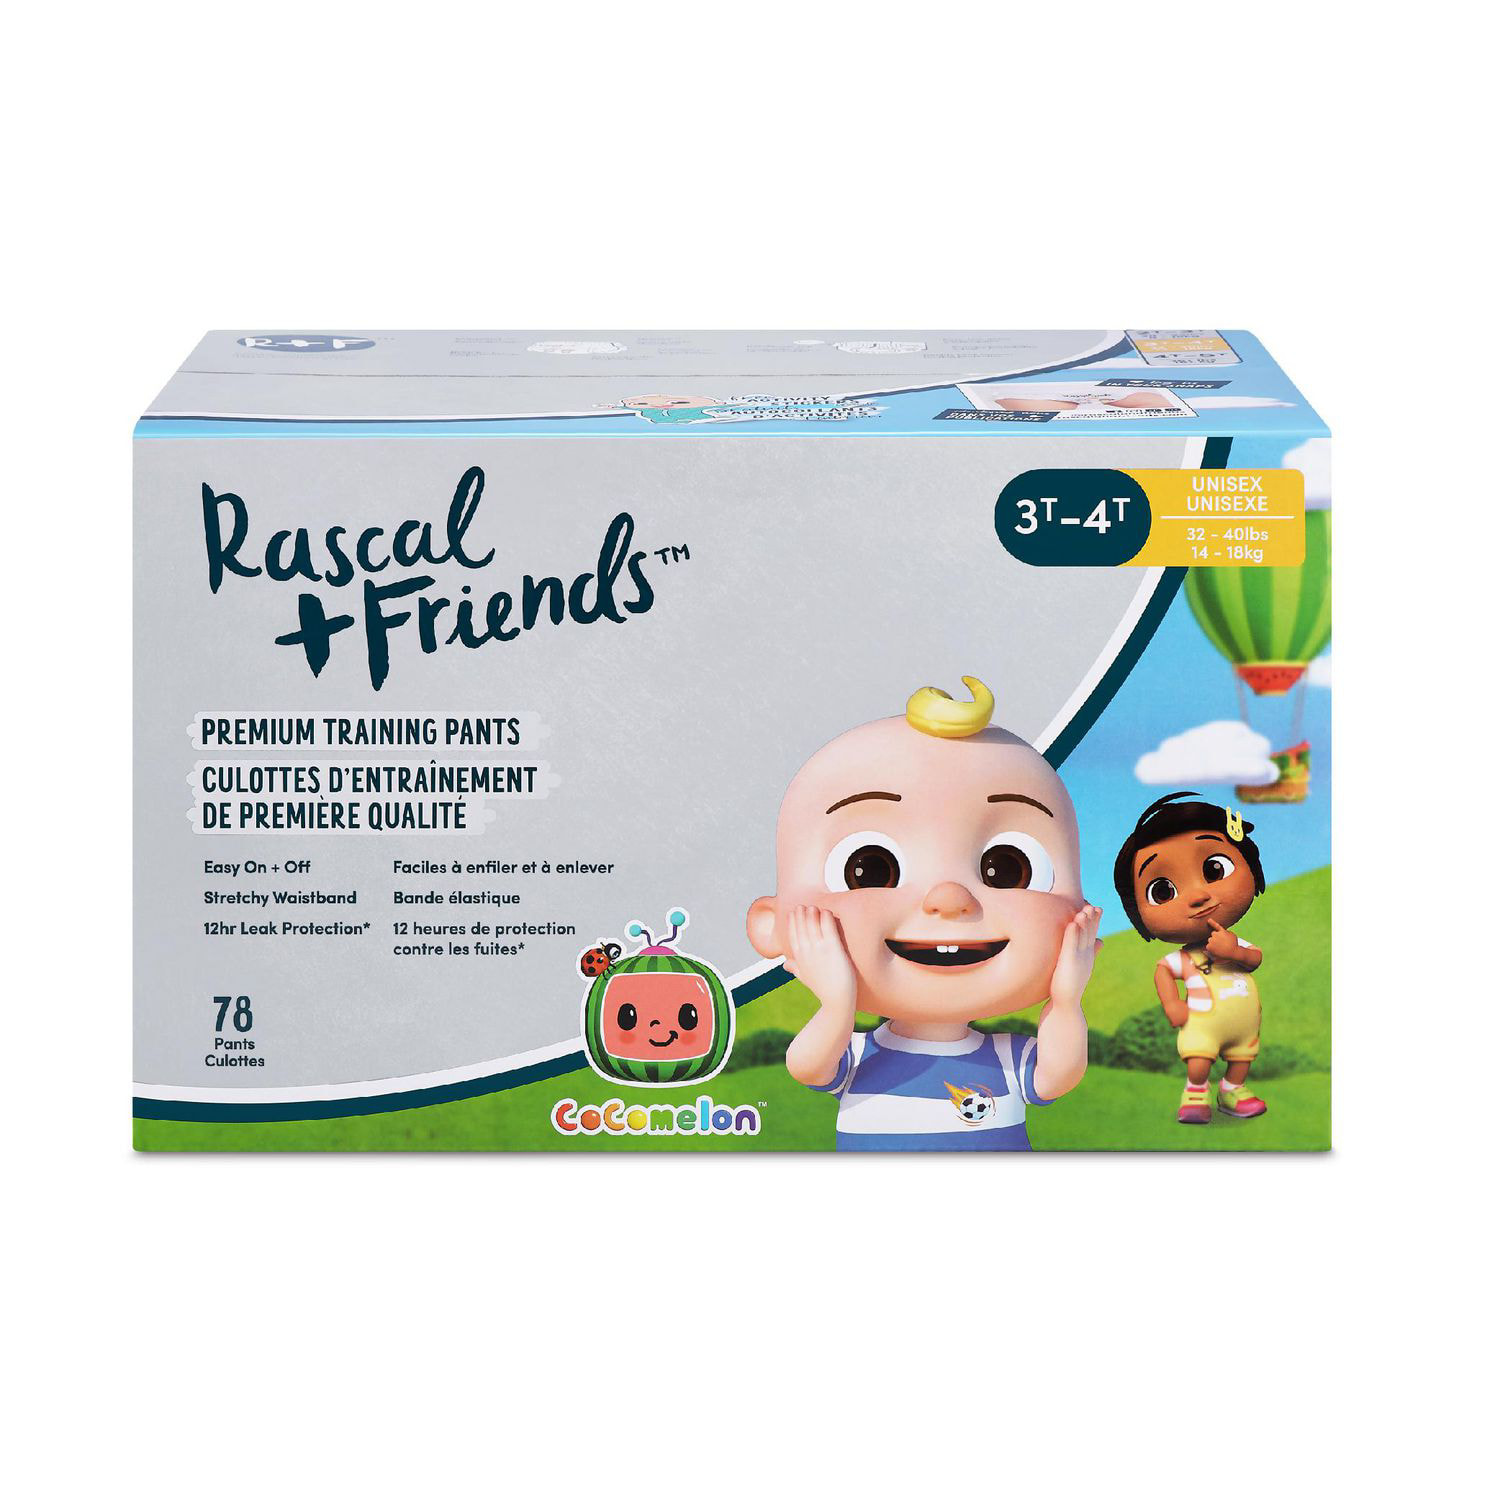 Rascal + Friends - Ready to play? Our premium nappy pants are